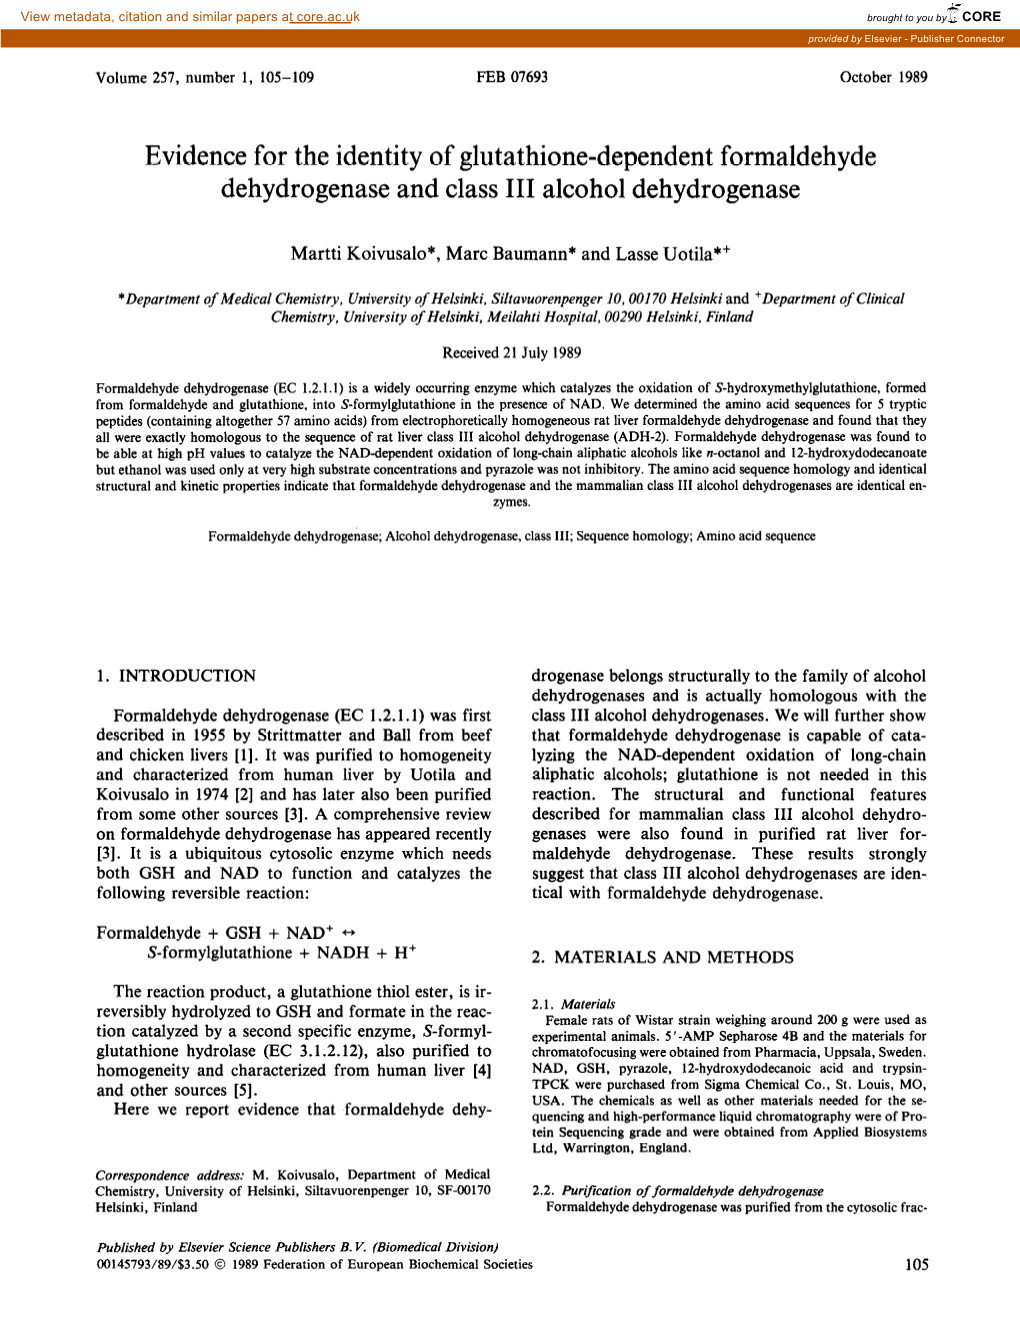 Evidence for the Identity of Glutathione-Dependent Formaldehyde Dehydrogenase and Class III Alcohol Dehydrogenase